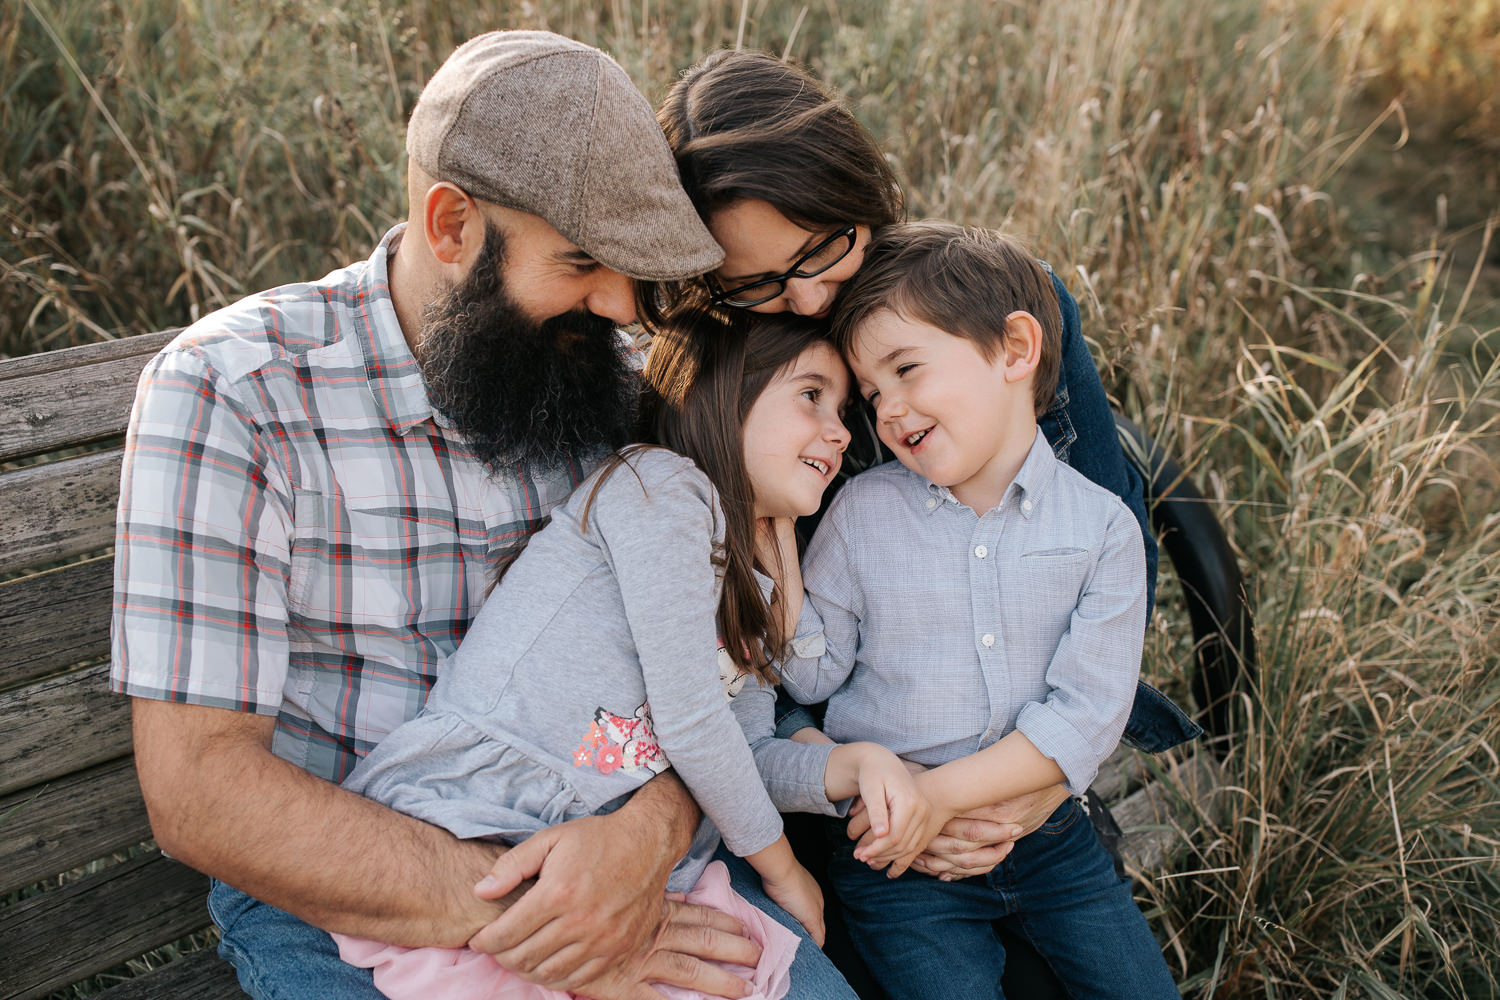 family of 4 sitting on park bench surrounded by tall grasses, 5 year old girl sitting on dad's lap, boy in mom's, snuggling, brother looking at sister - Stouffville Lifestyle Photography